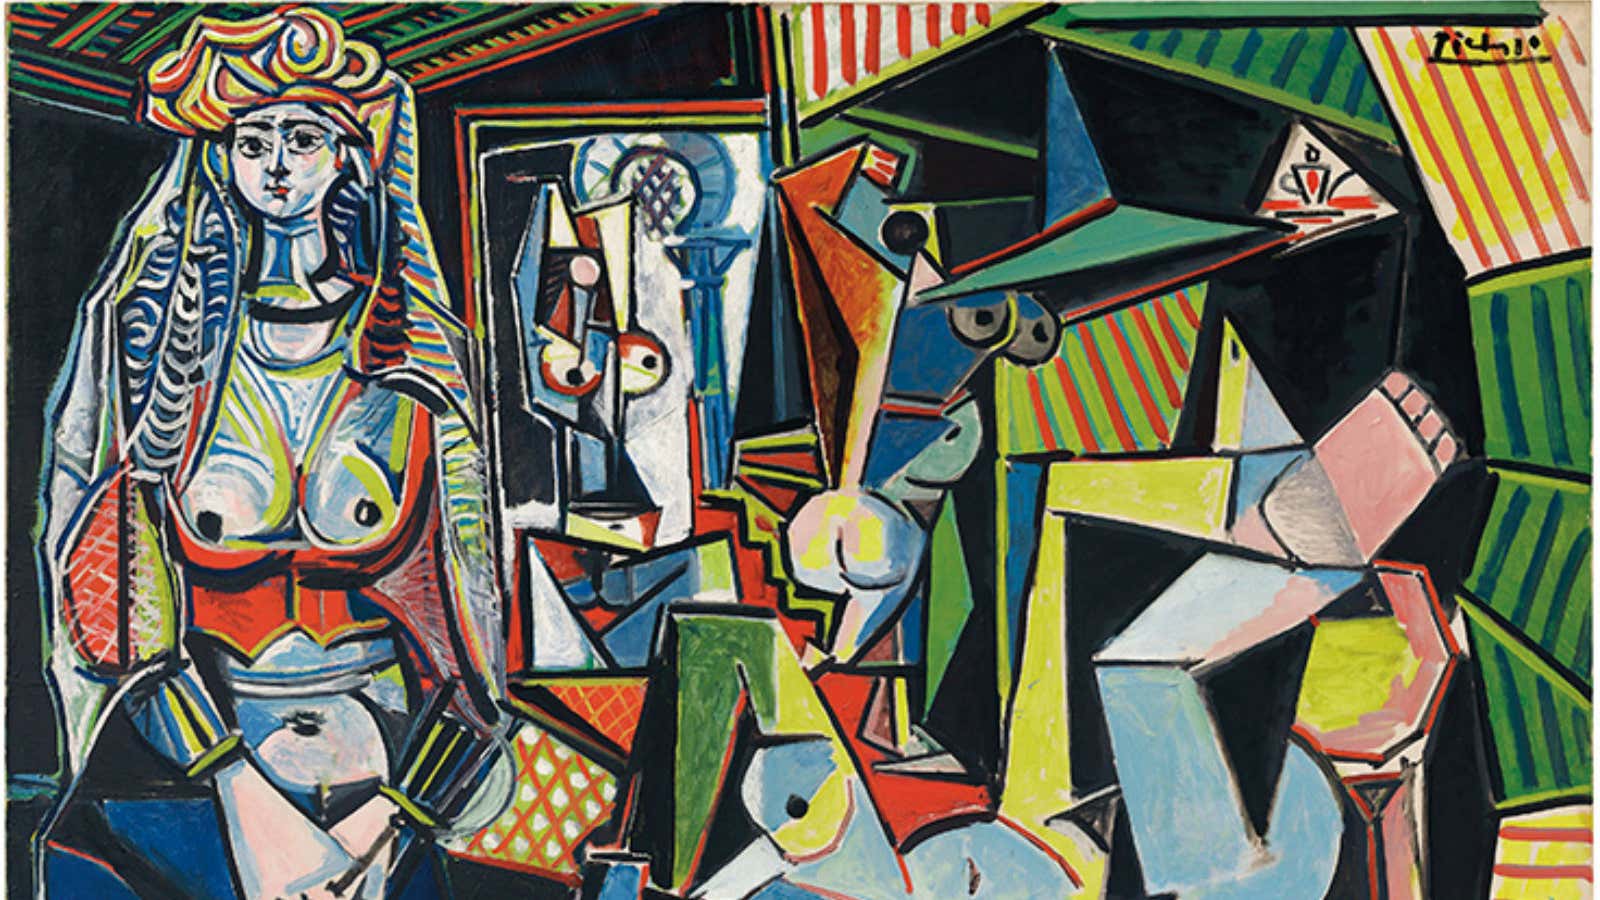 This $179 million Picasso is now the most expensive painting ever sold at auction